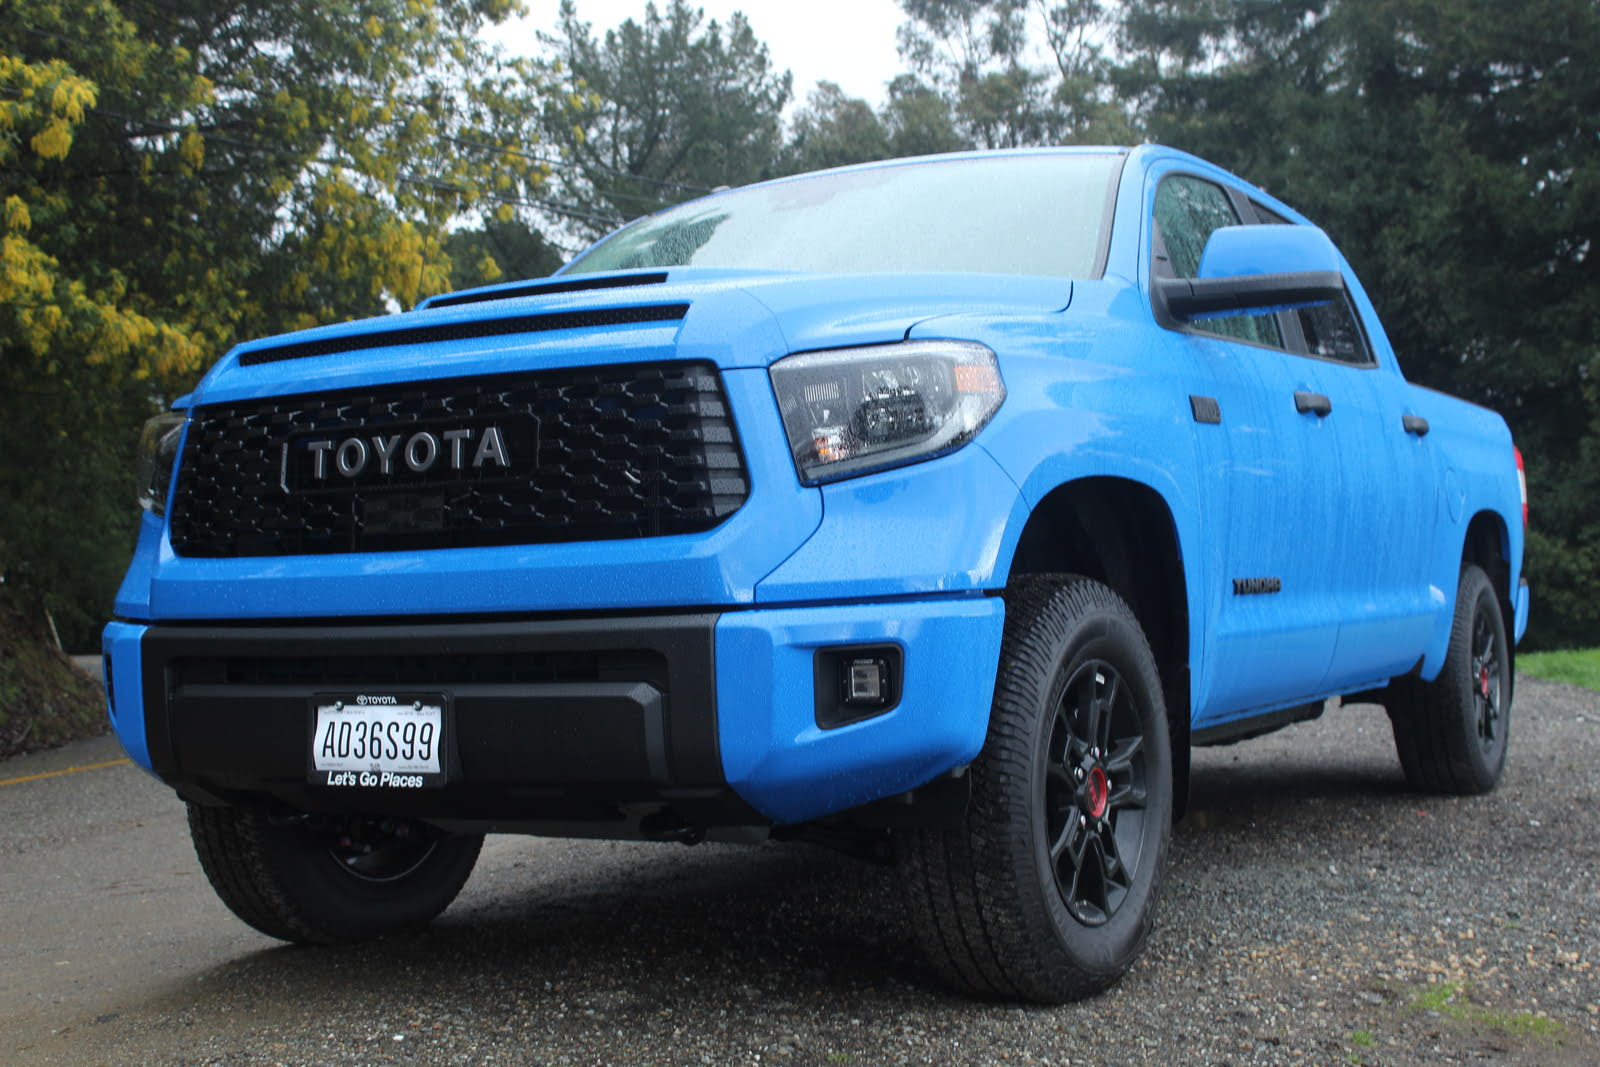 2019 Toyota Tundra: Prices, Reviews & Pictures - CarGurus